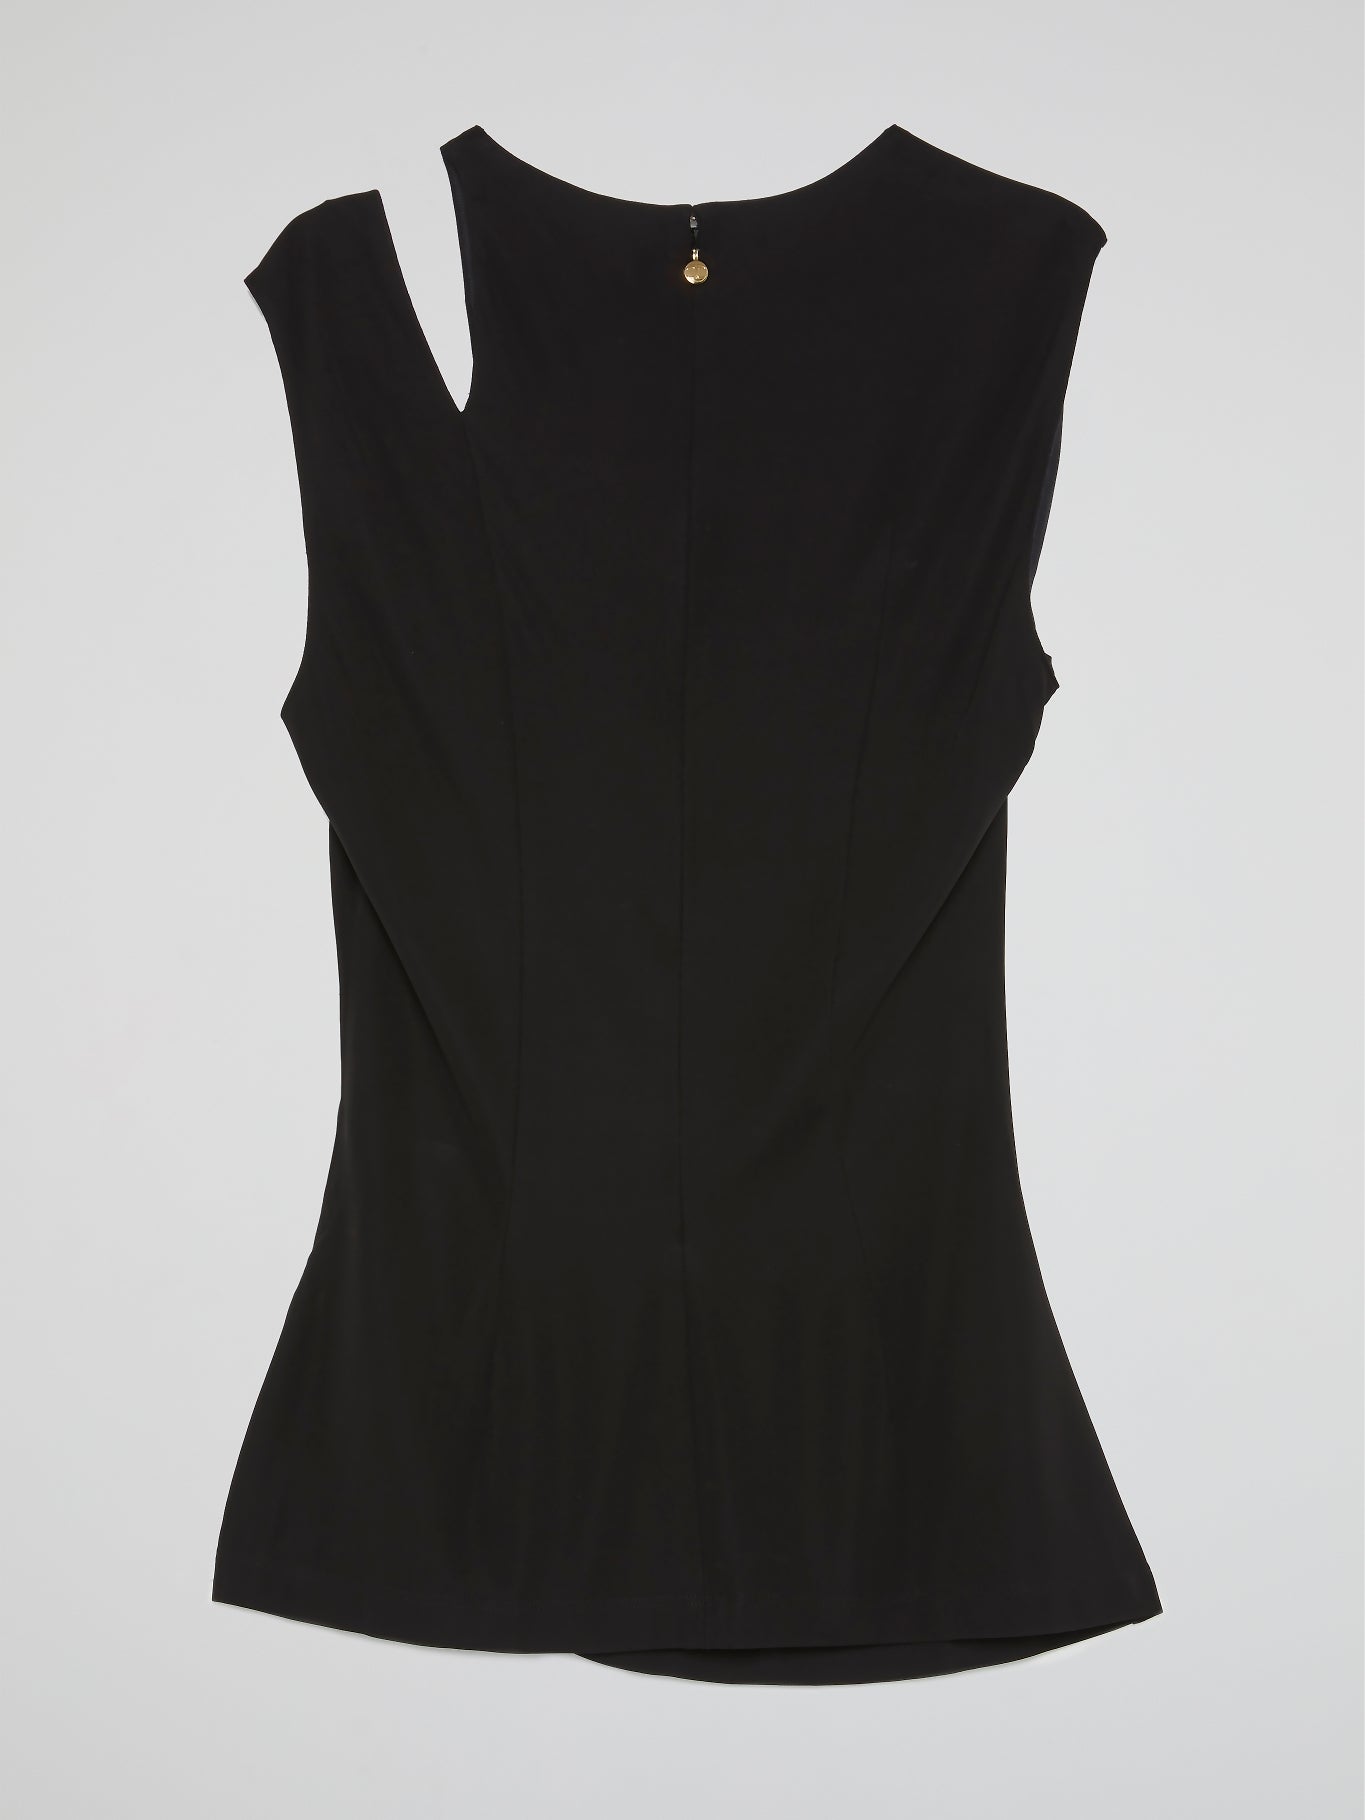 Black Cut Out Ruched Top